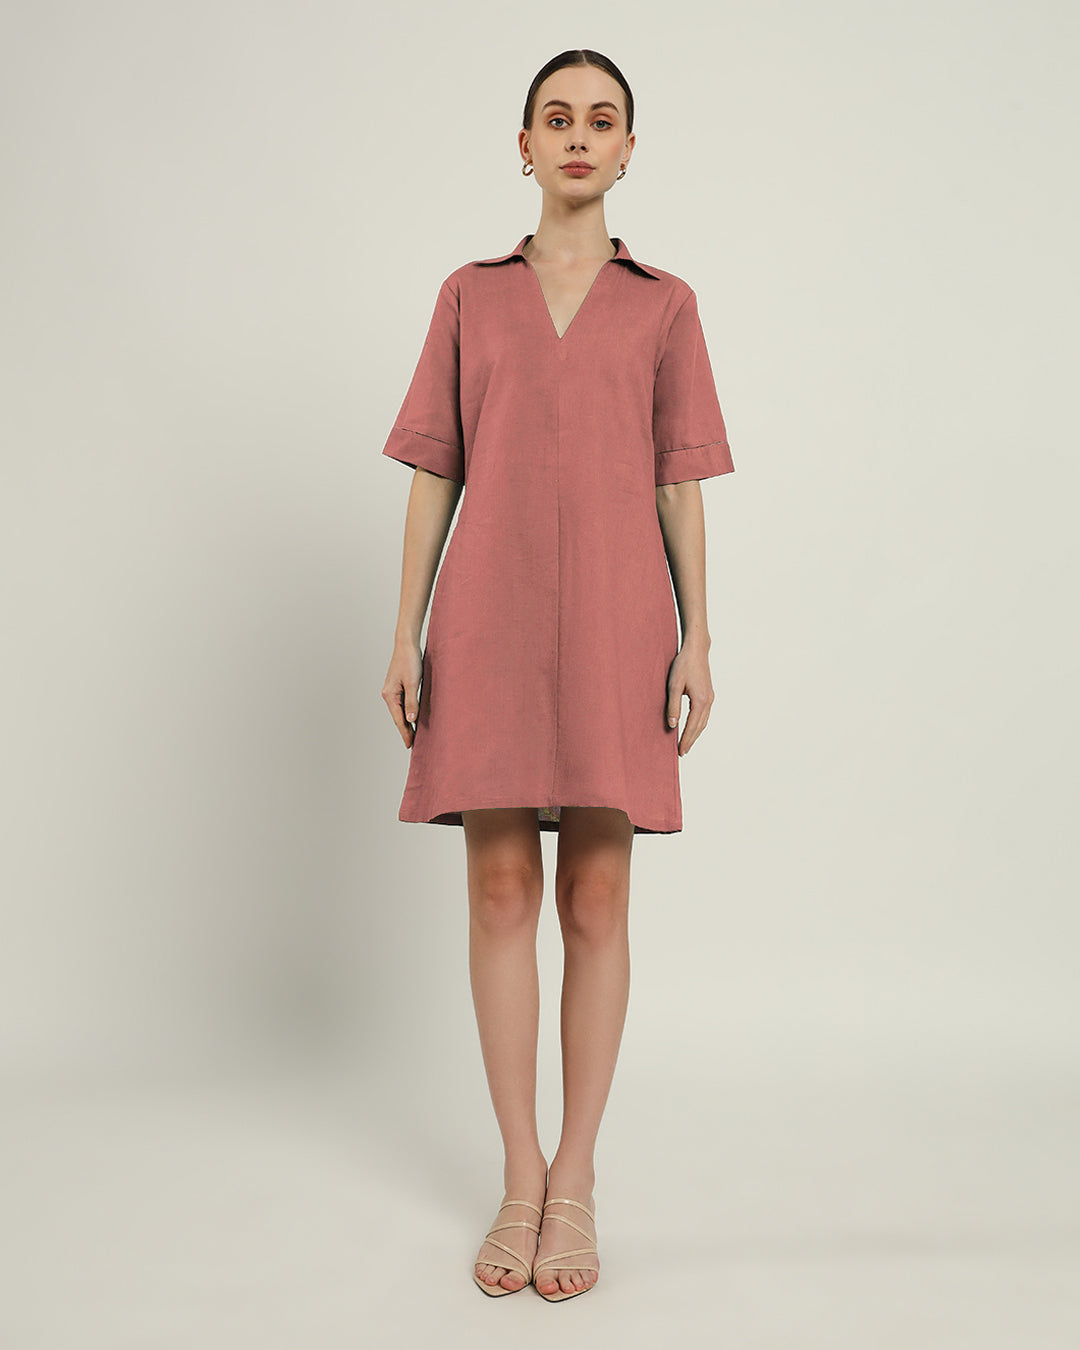 The Ermont Ivory Pink Cotton Dress